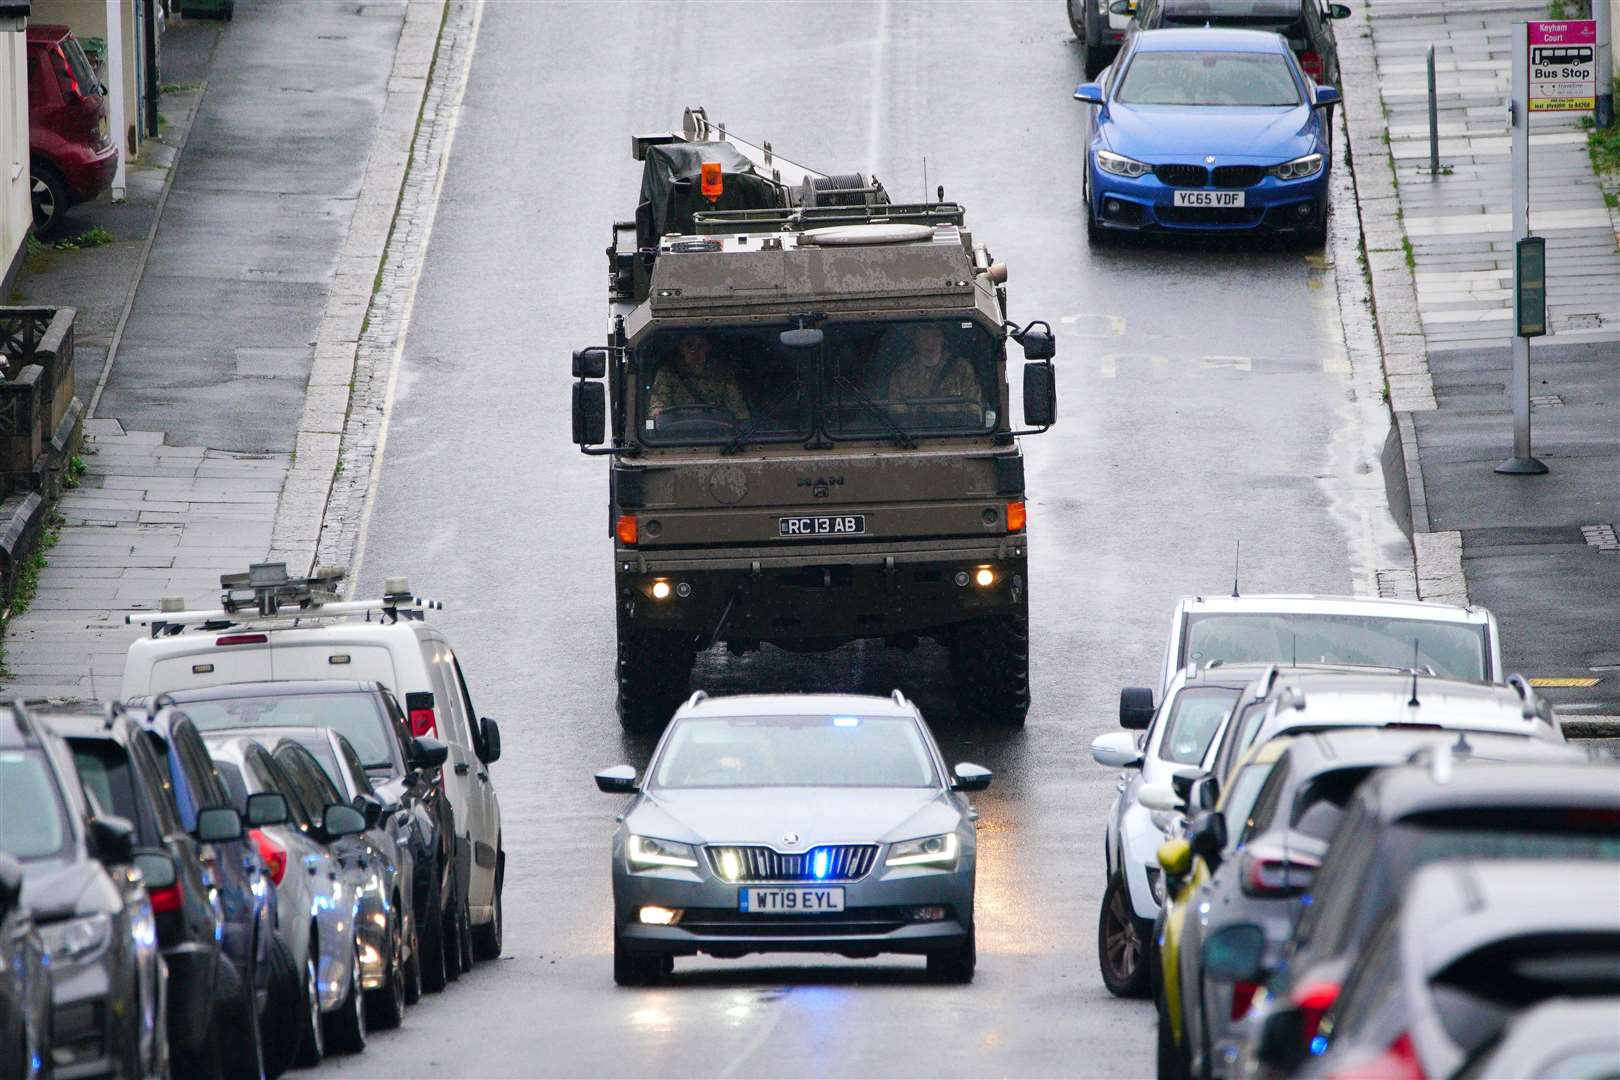 A military vehicle seen in Plymouth, where residents were evacuated and a cordon was put in place following the discovery of a WWII bomb (Ben Birchall/PA)